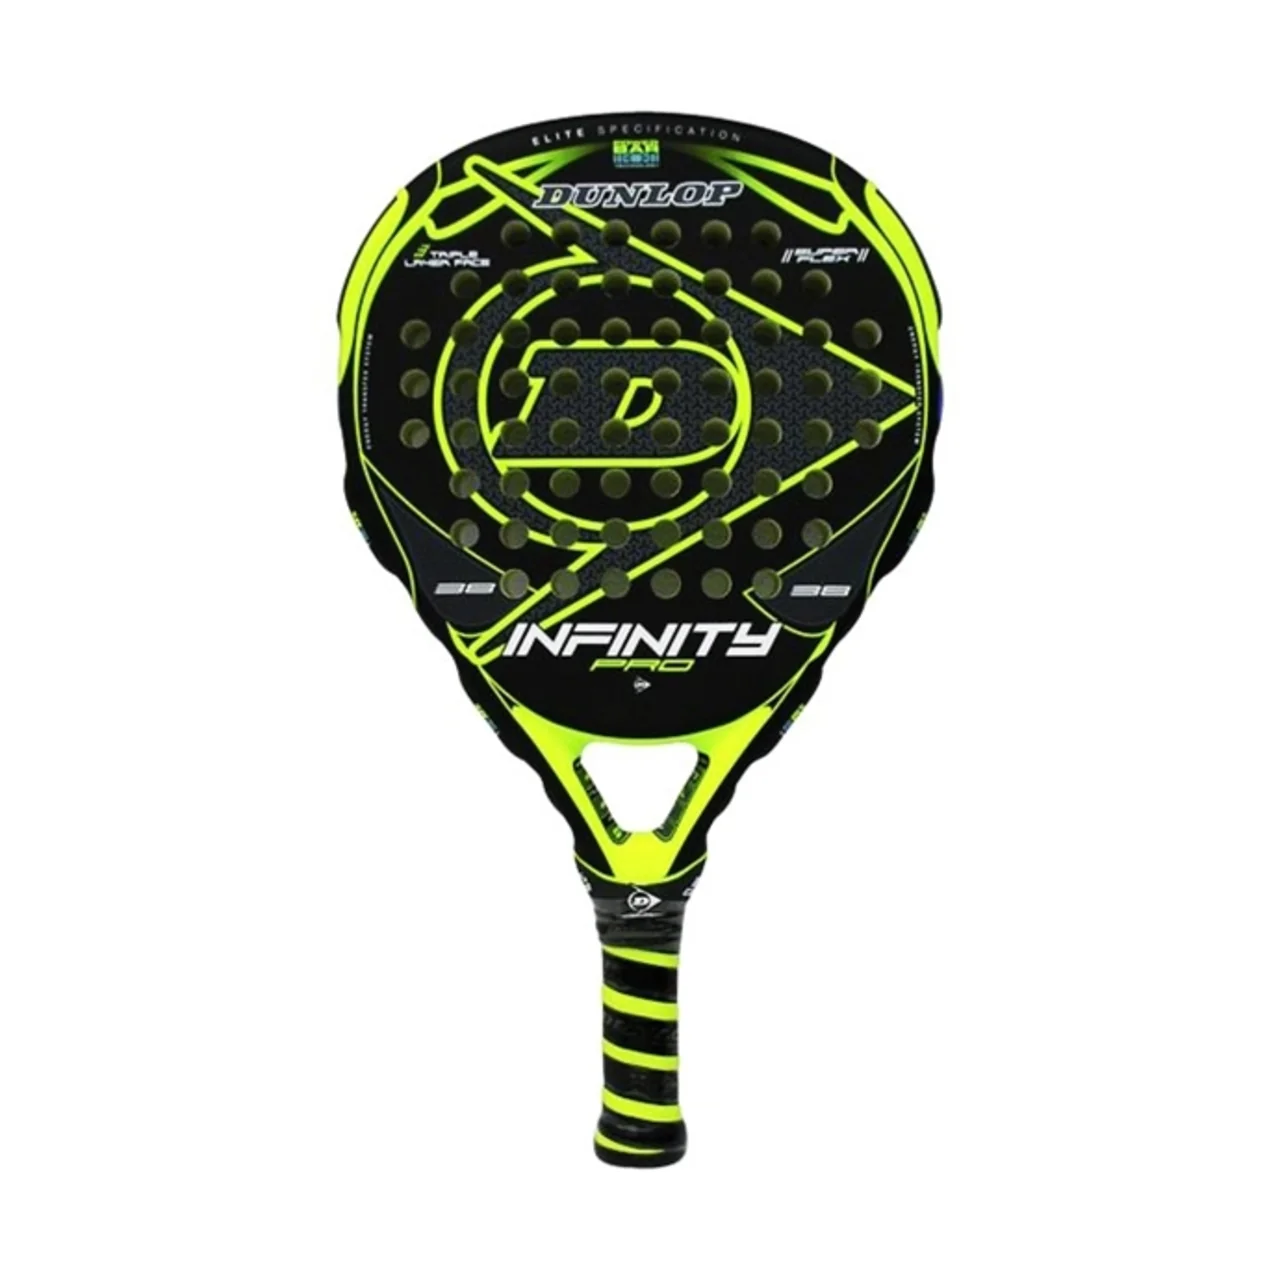 Dunlop Infinity Pro Fluo Yellow 2019